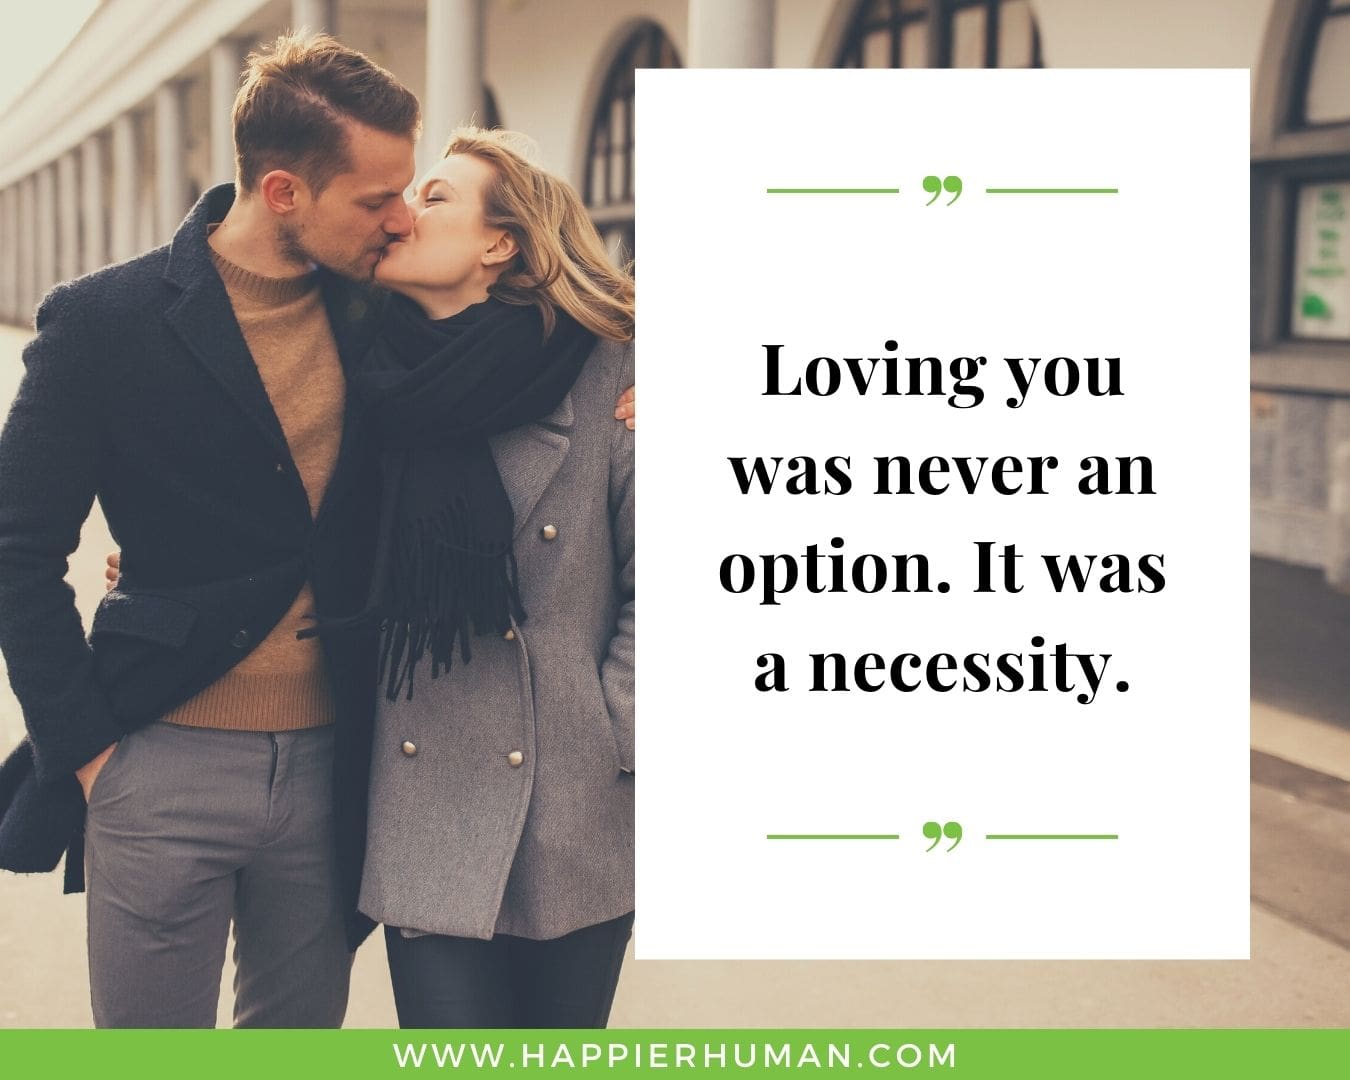 Unconditional Love Quotes for Her - “Loving you was never an option. It was a necessity.”